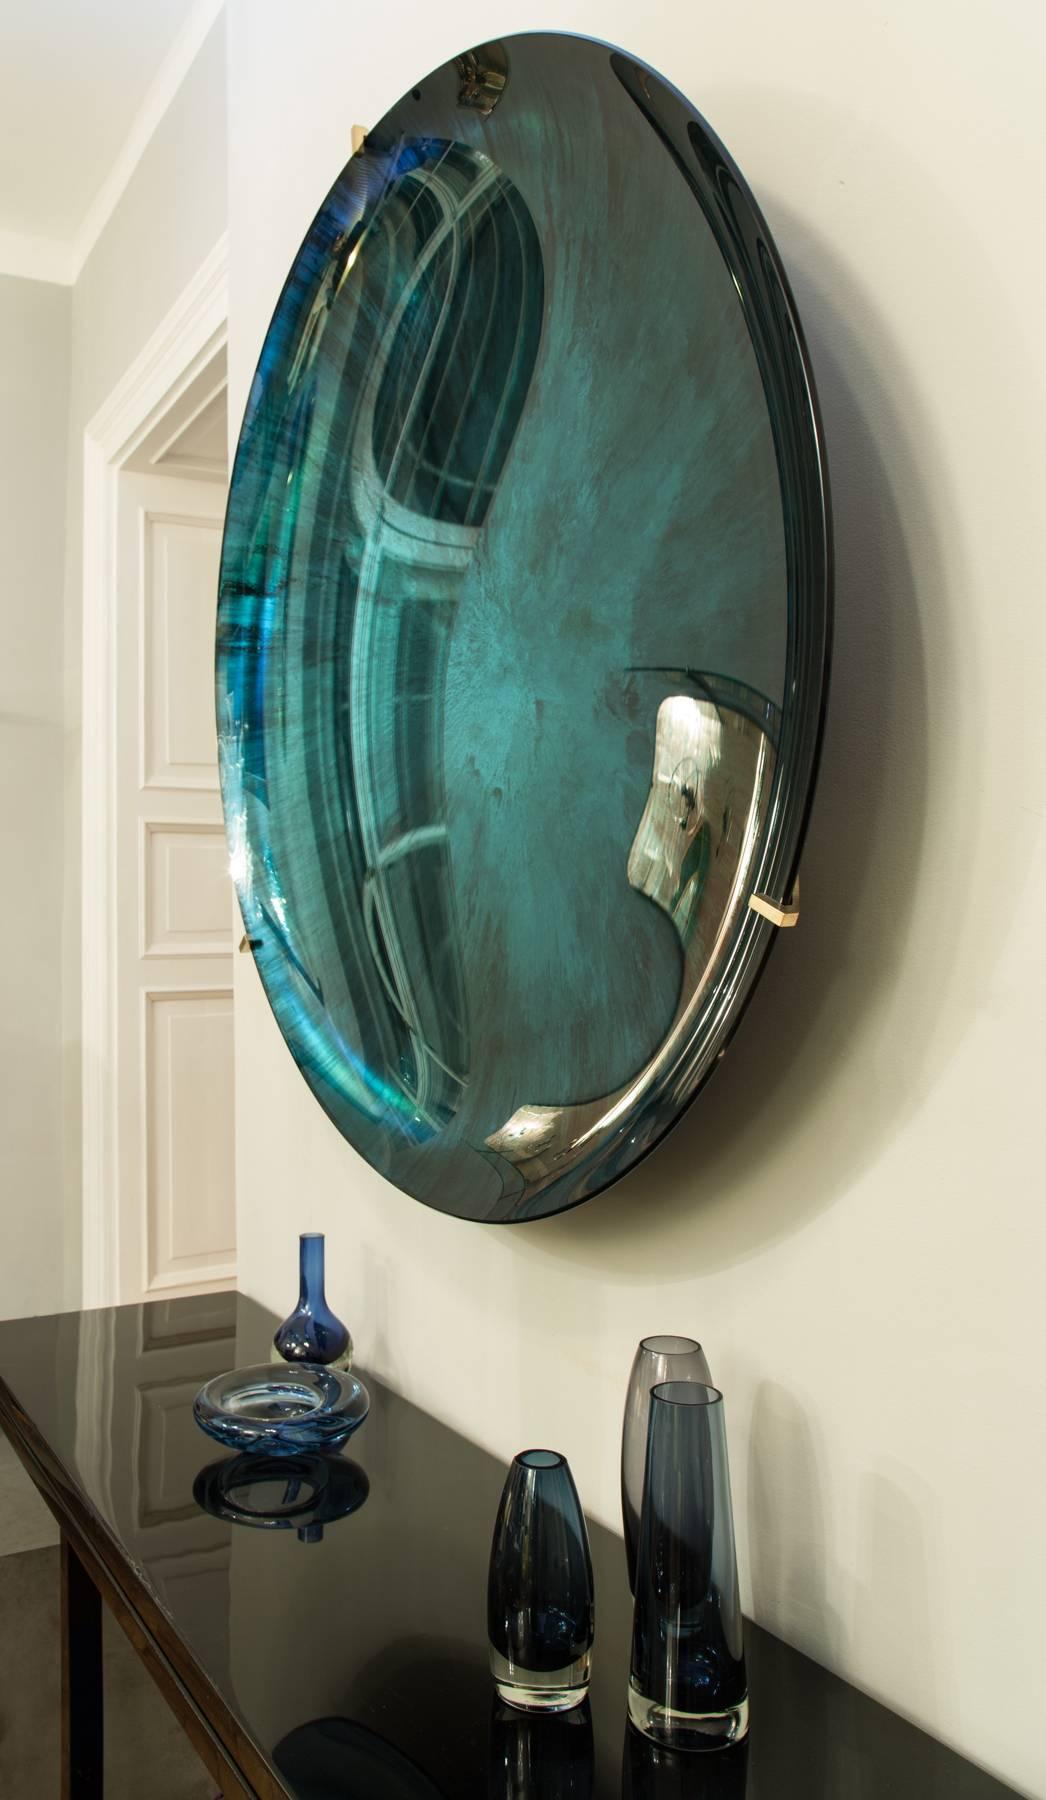 Amazing mirror object by Christophe Gaignon, France in 2015, unique piece, concave glass bowl, blue green reflections, brass mount, signed on the backside.
 
Dimensions: Diameter 108 cm, depth 14 cm.